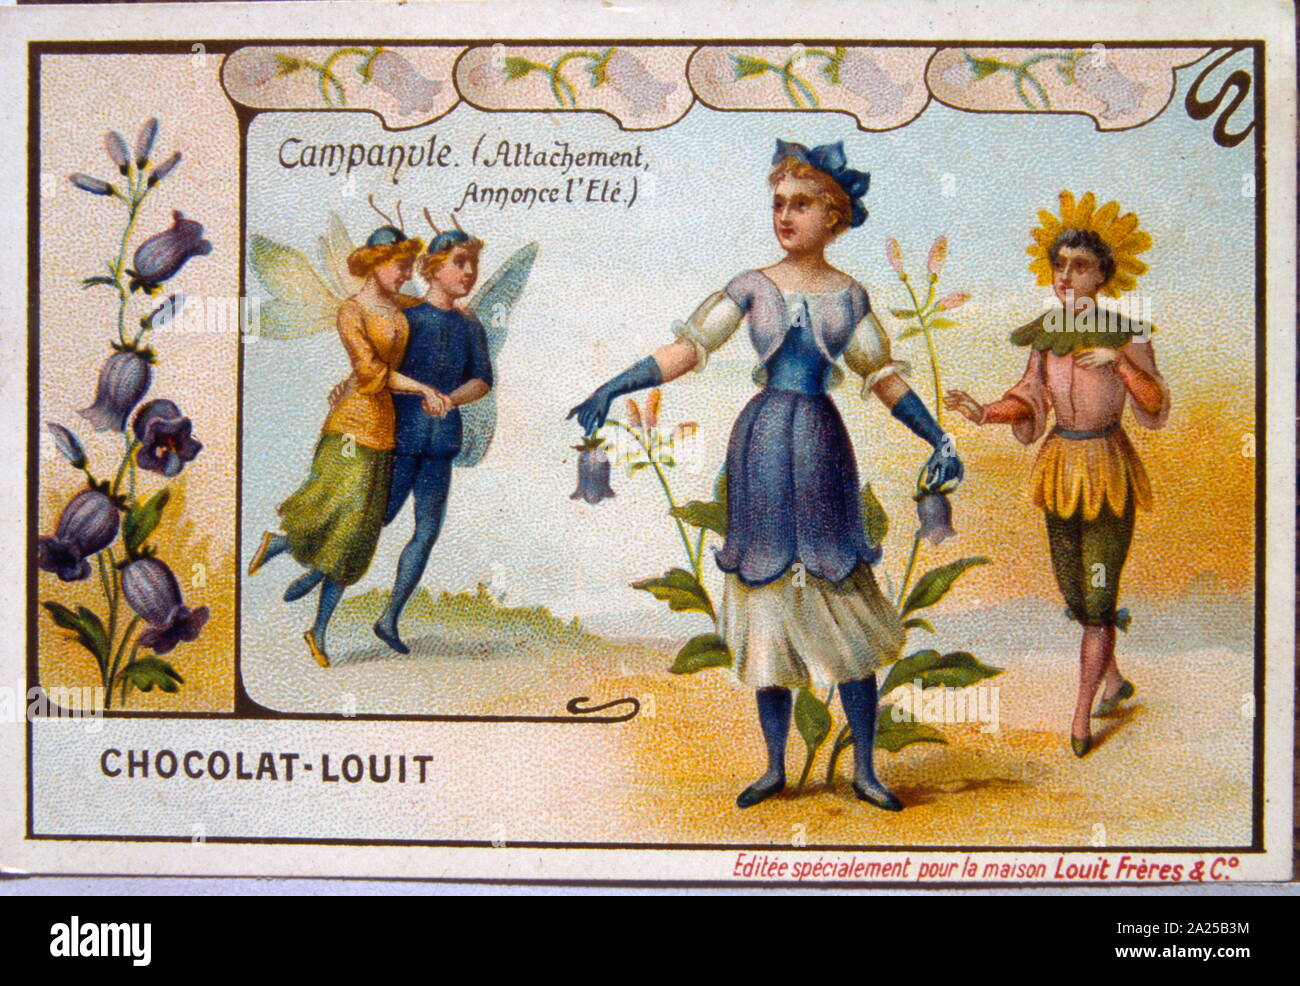 chromolithograph advert for chocolat-Louit, French, 1900 Stock Photo